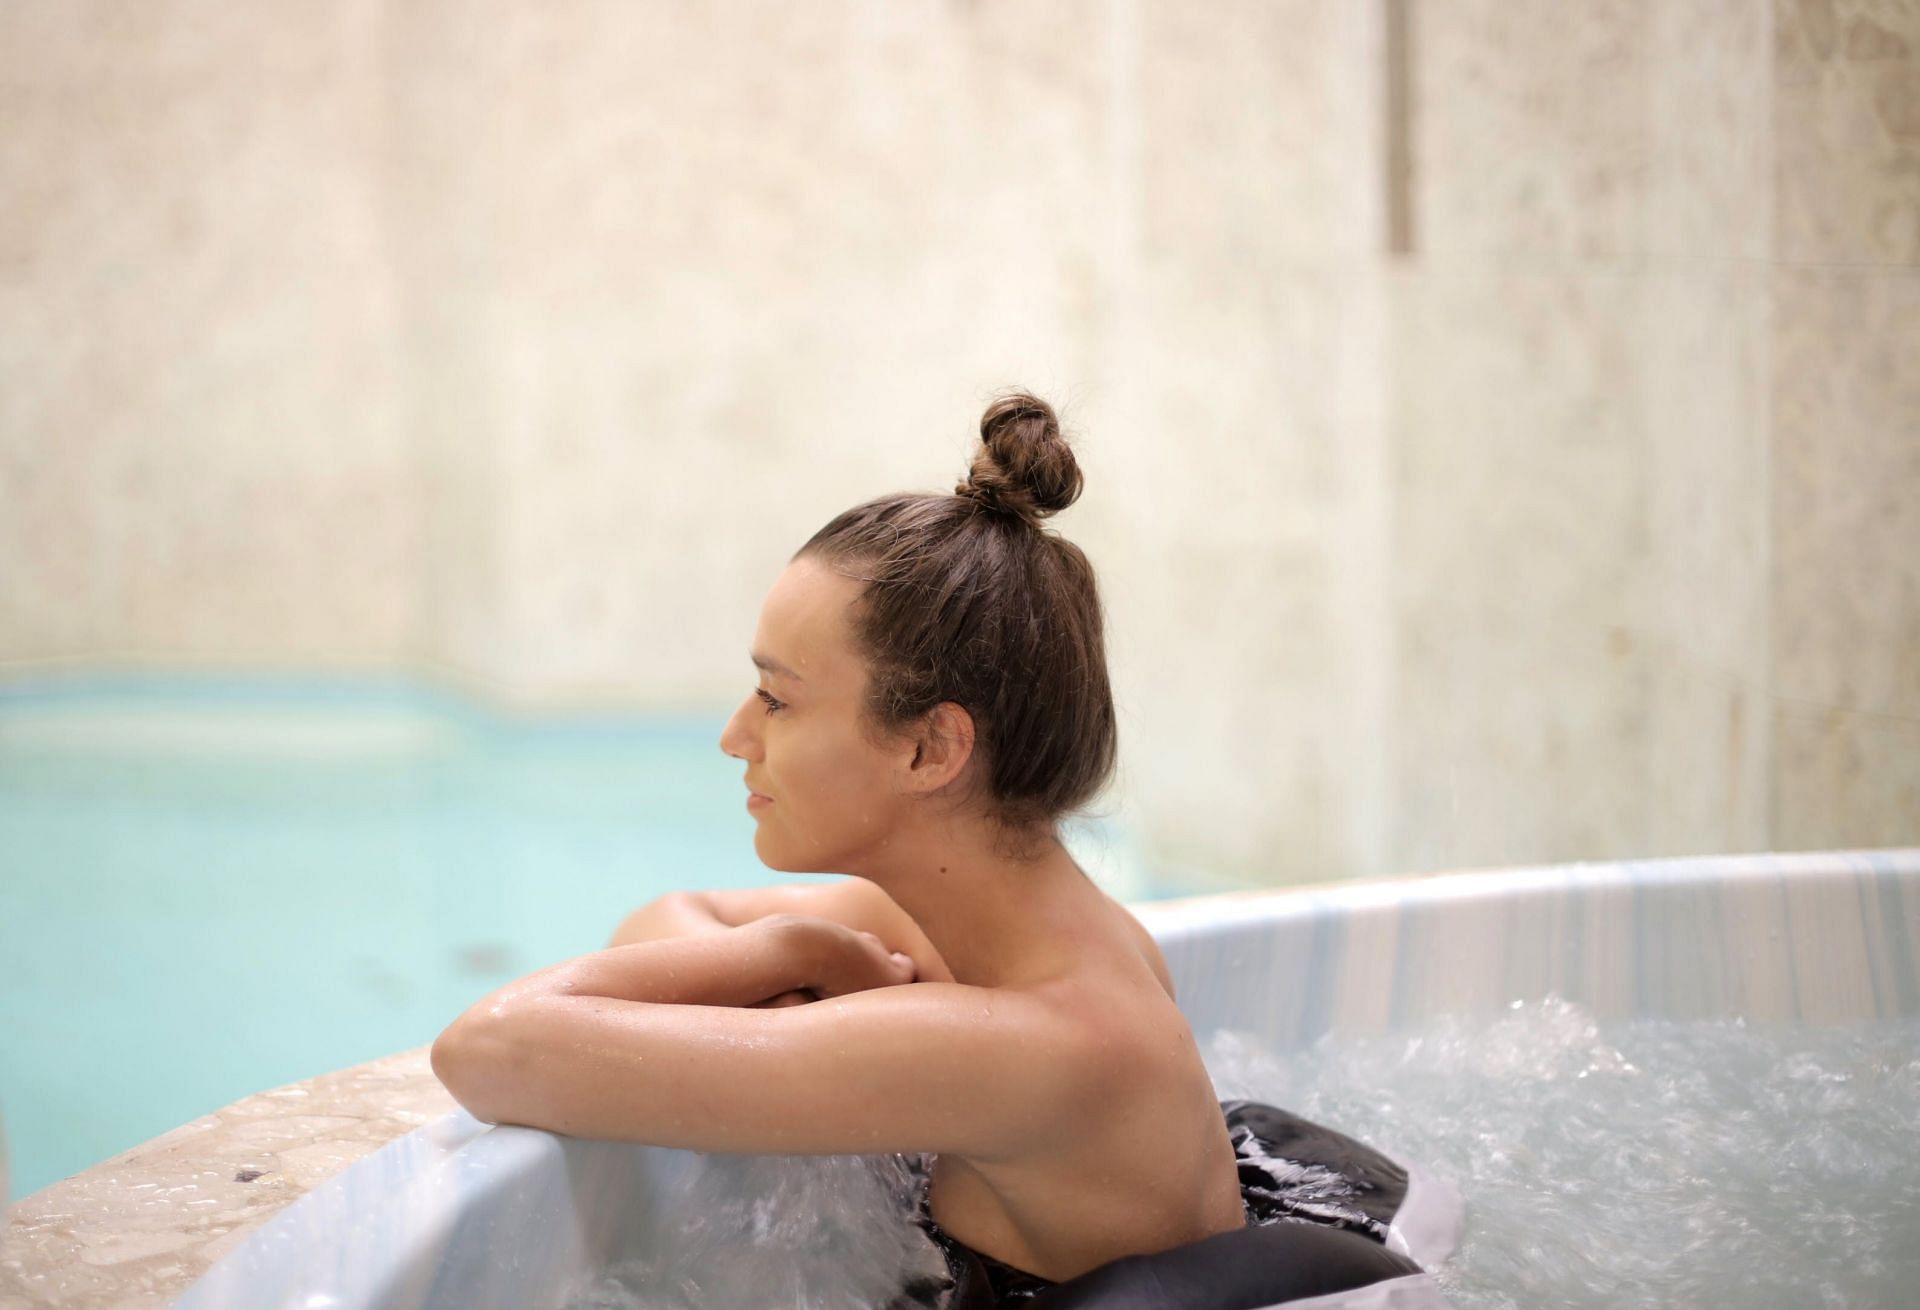 Hot tub health benefits (image sourced via Pexels / Photo by andrea)